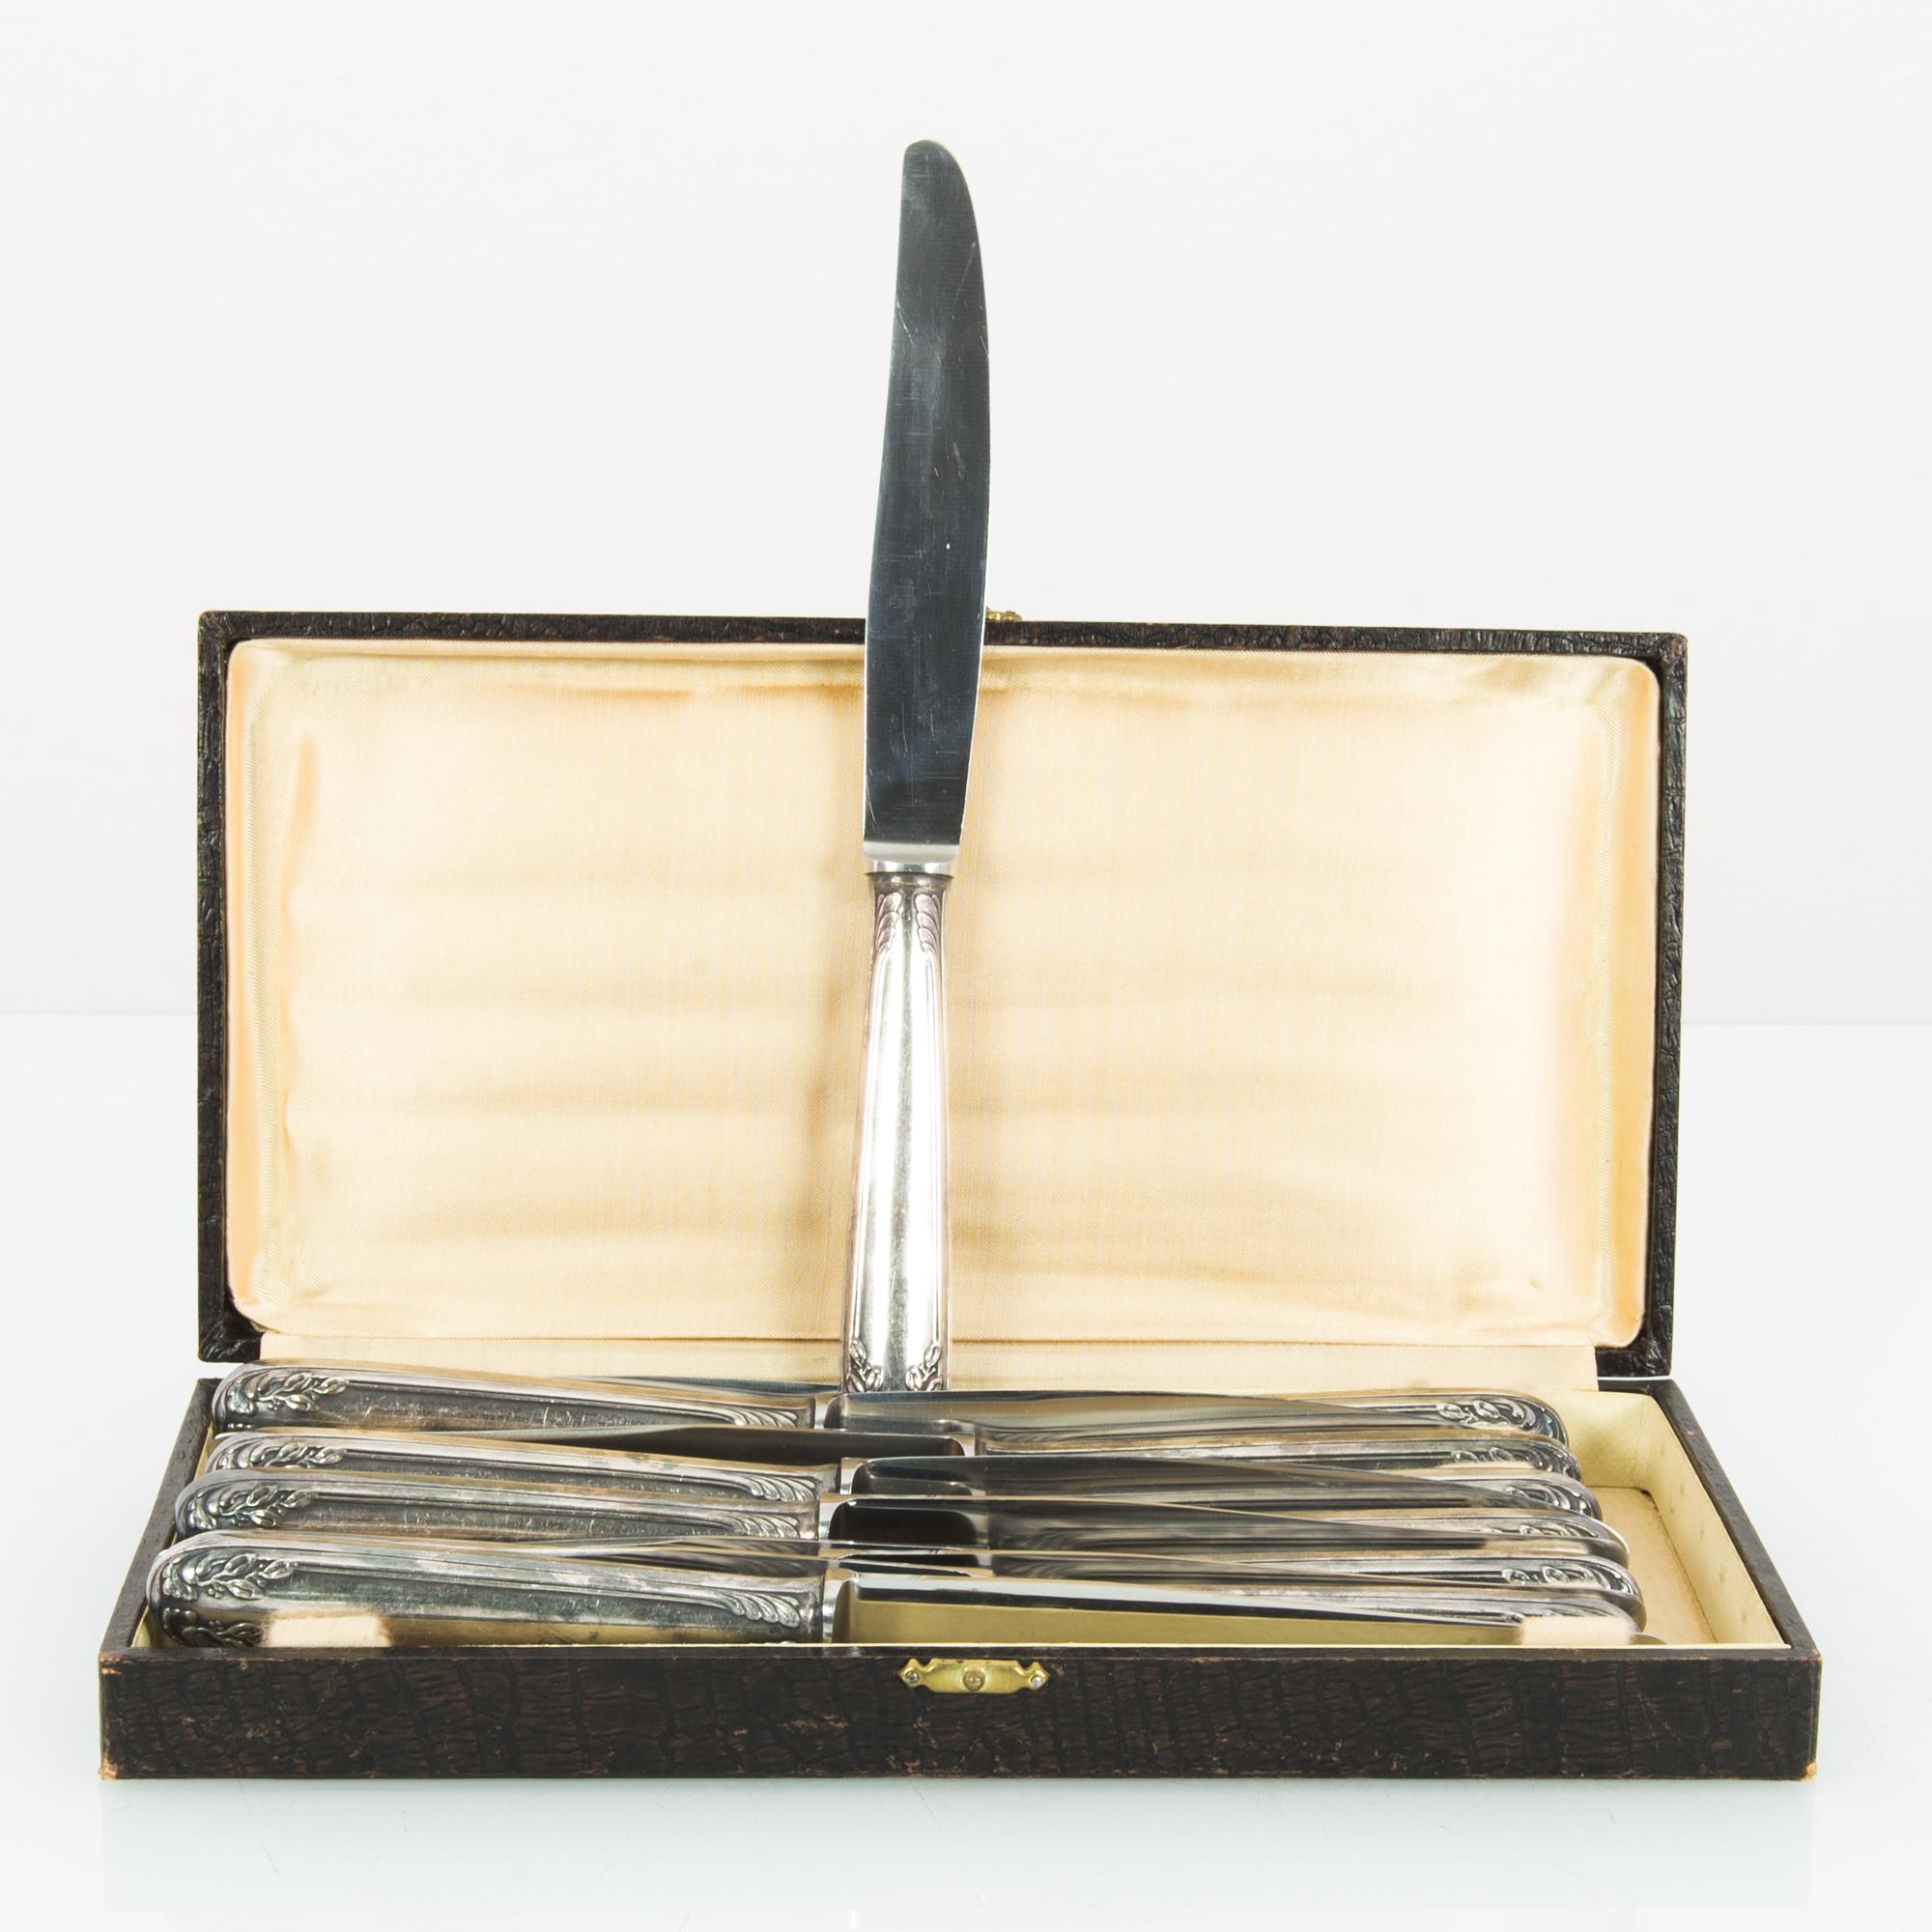 A set of silver-plated knives from Europe, circa 1920. Silver knives sit within a rectangular box, which closes with a gold clasp. The box is finished in dark brown snakeskin; the interior is lined with rose-gold silk. The handles of the knives are